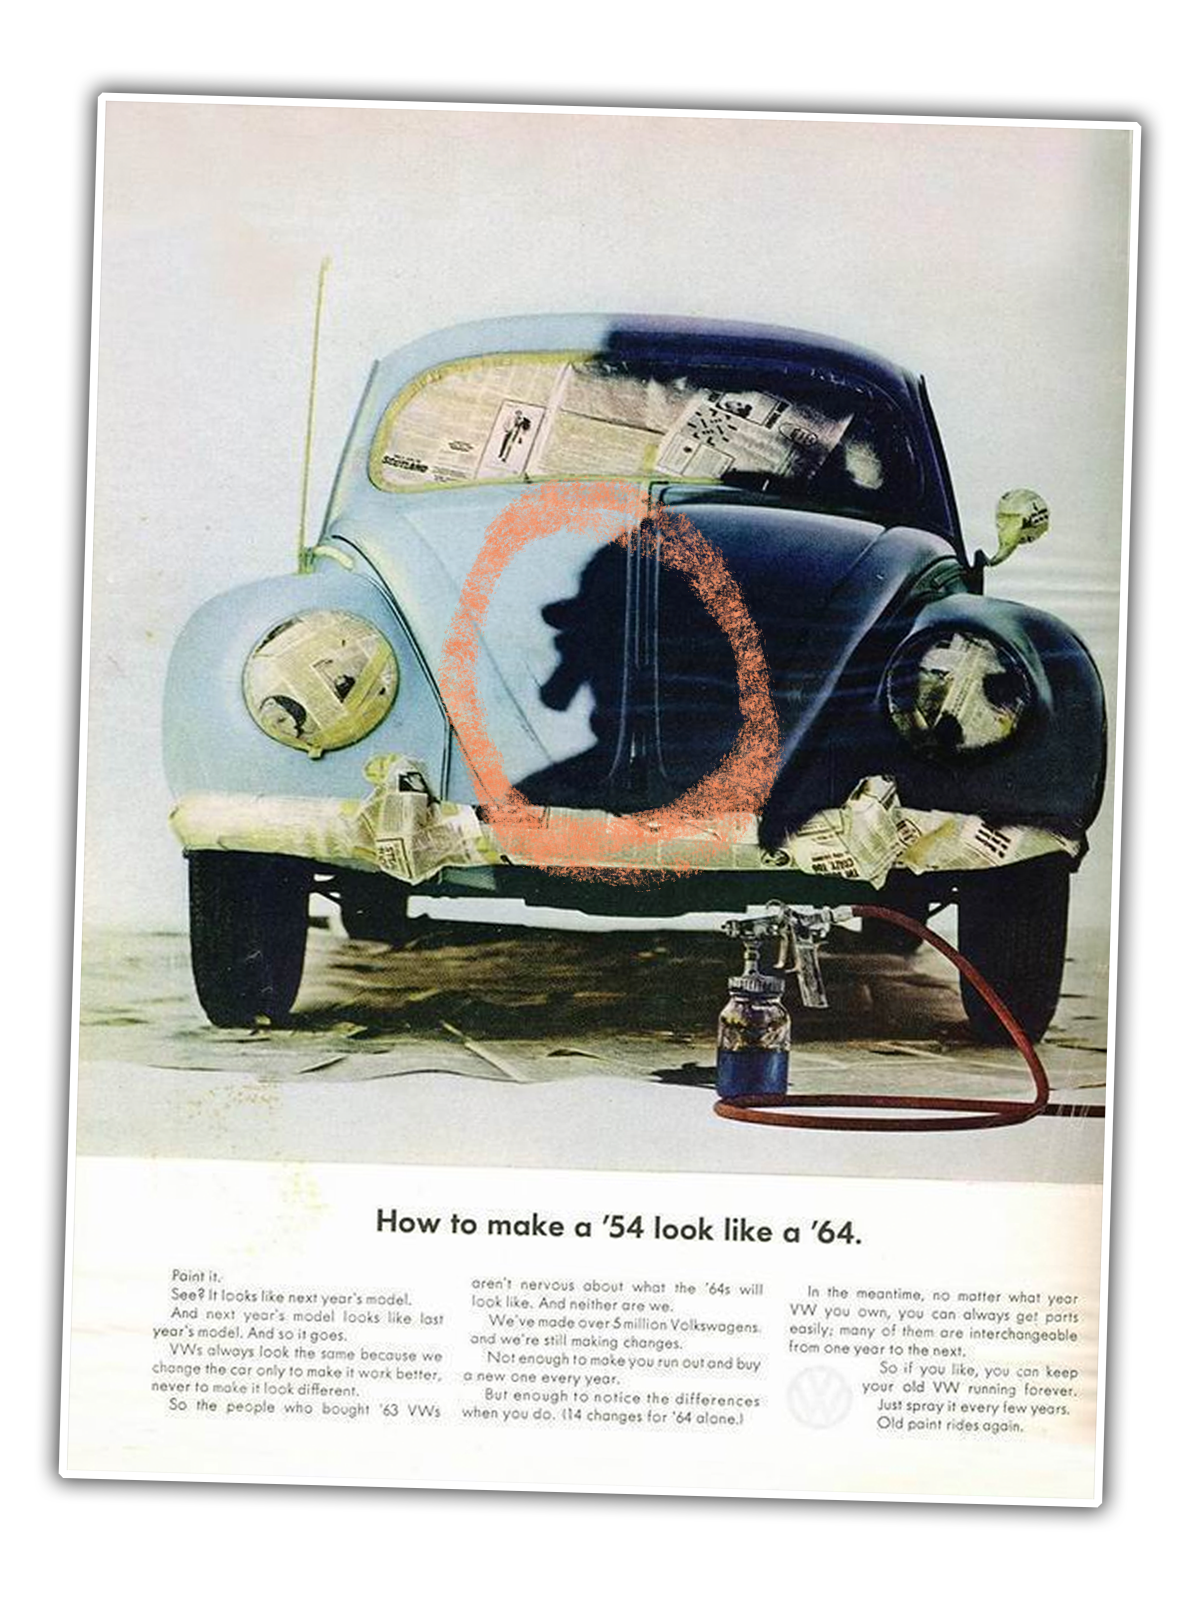 I’ve Always Seen Something Weird In This Old VW Ad And I Wonder If You Do Too